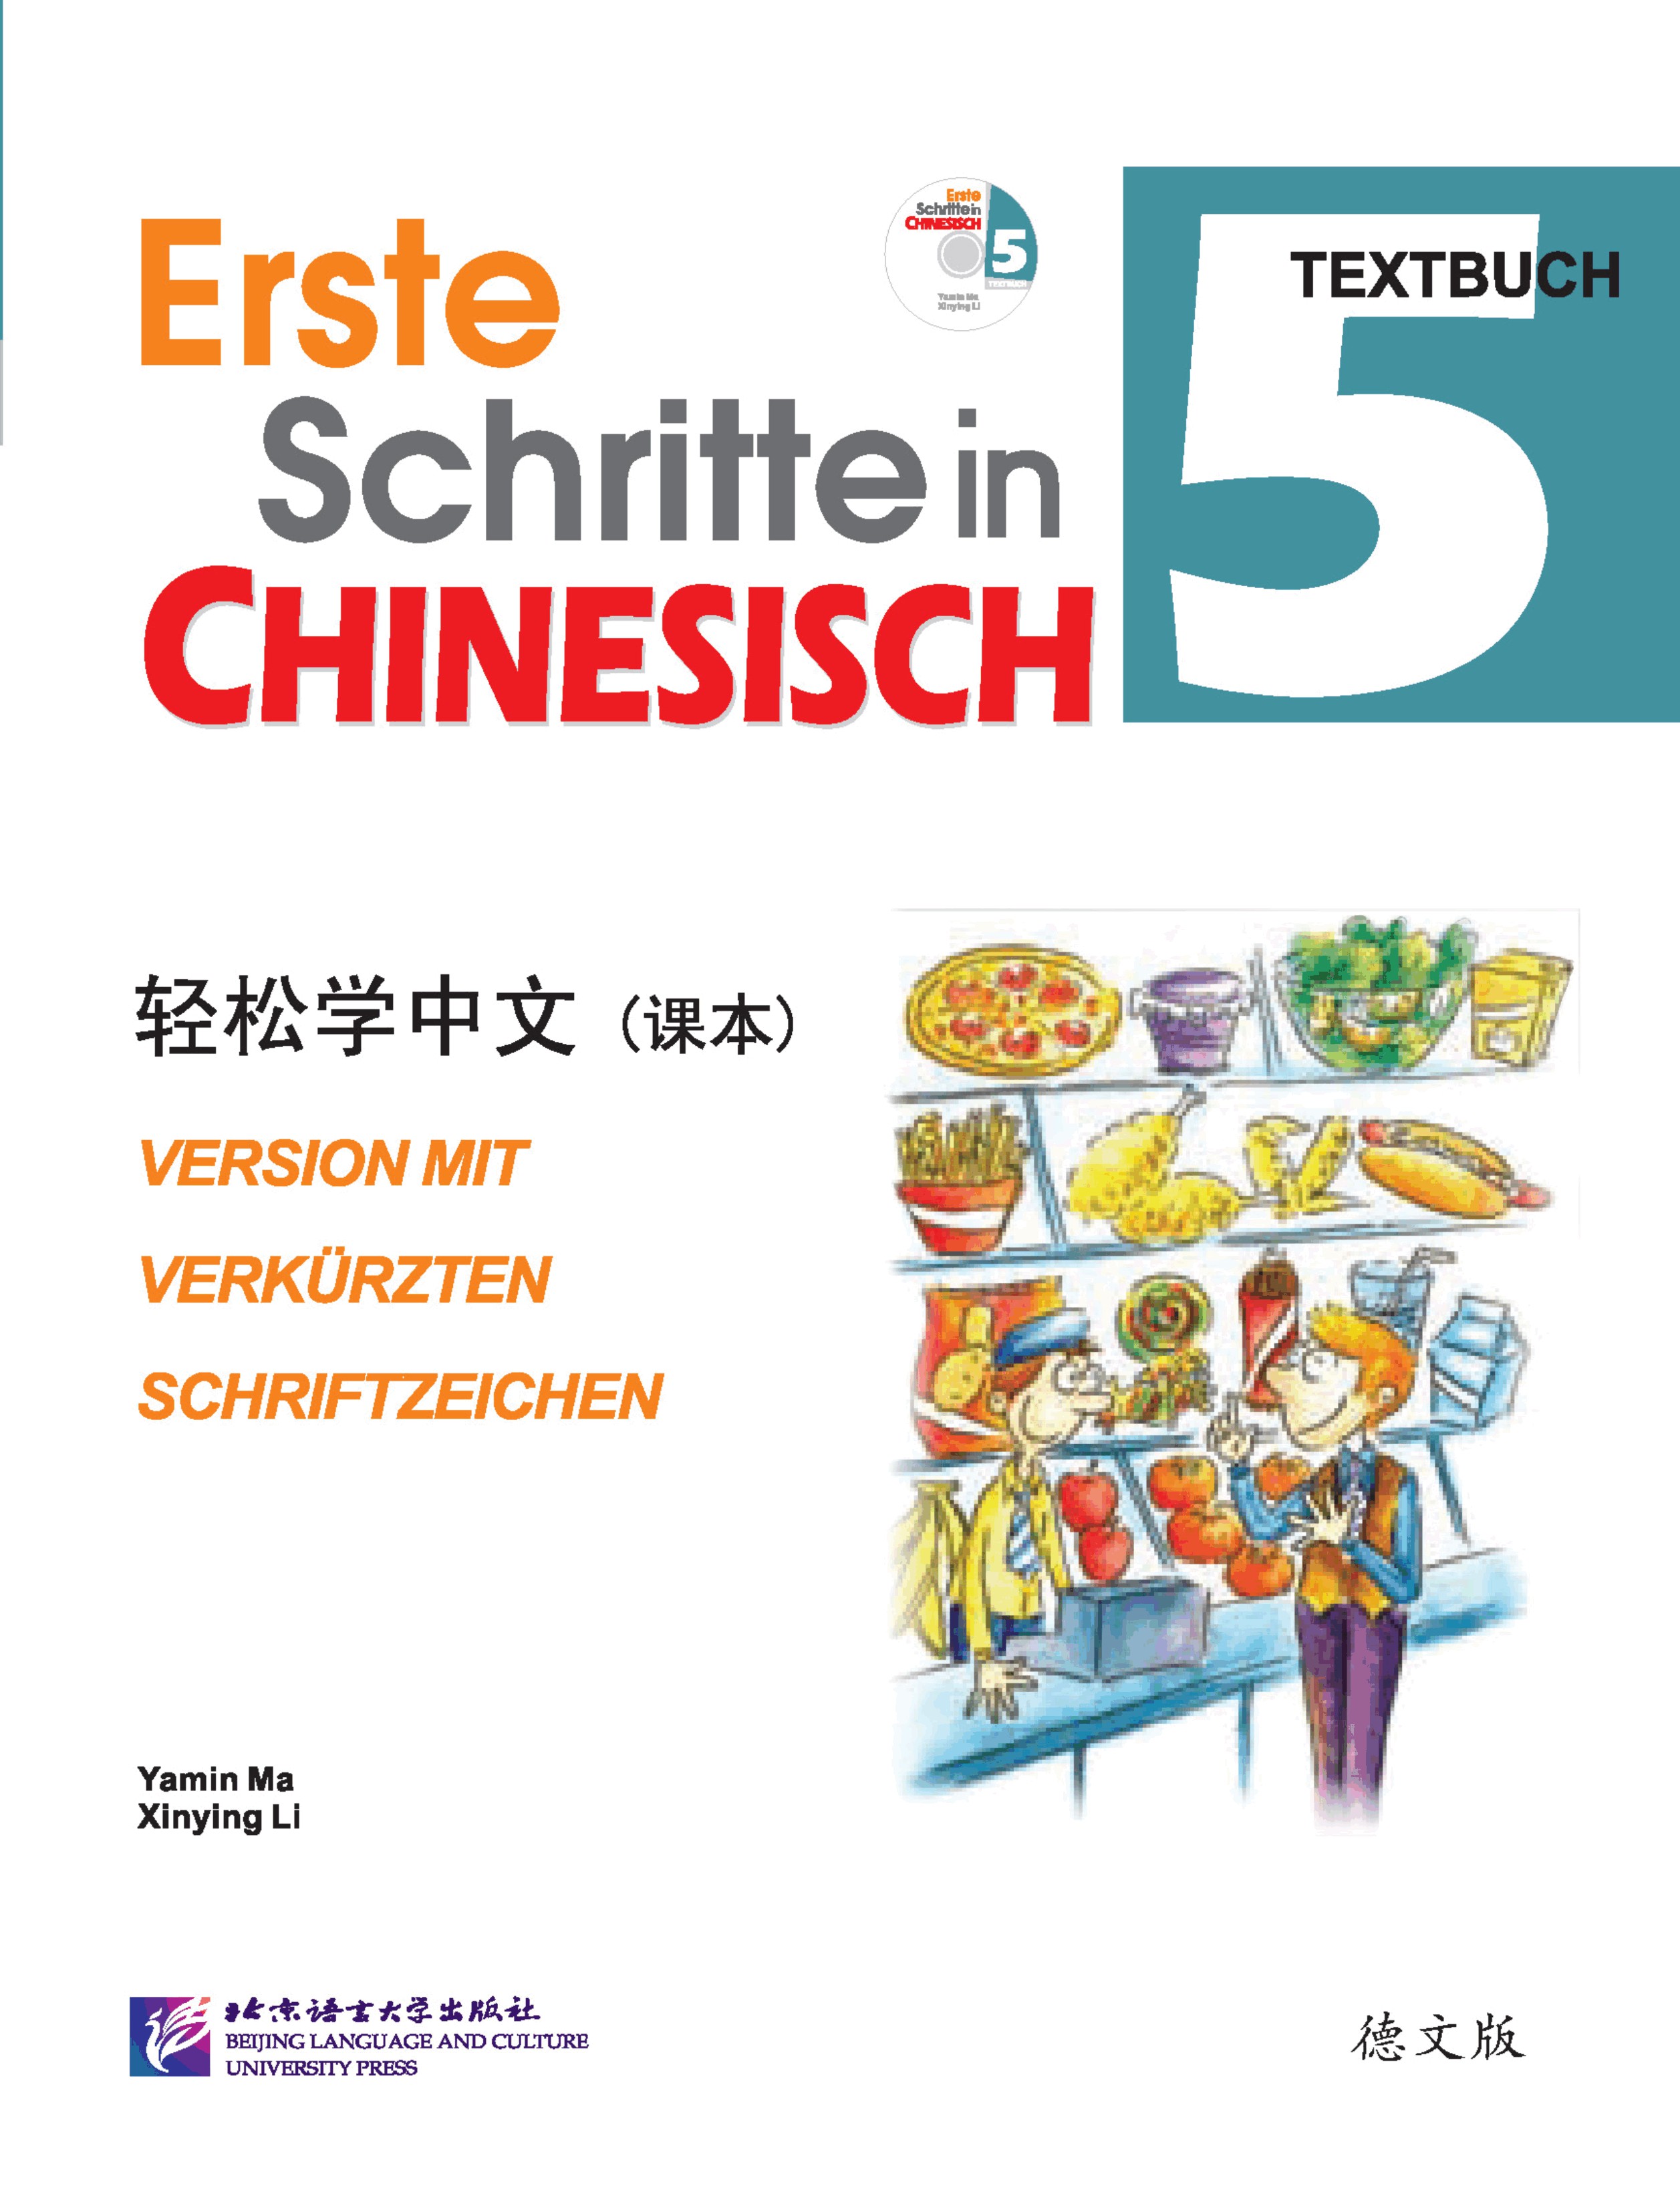 Easy Steps to Chinese (German Edition) vol.5 - Textbook  (+ 1 CD)<br>ISBN:978-7-5619-4432-5, 9787561944325